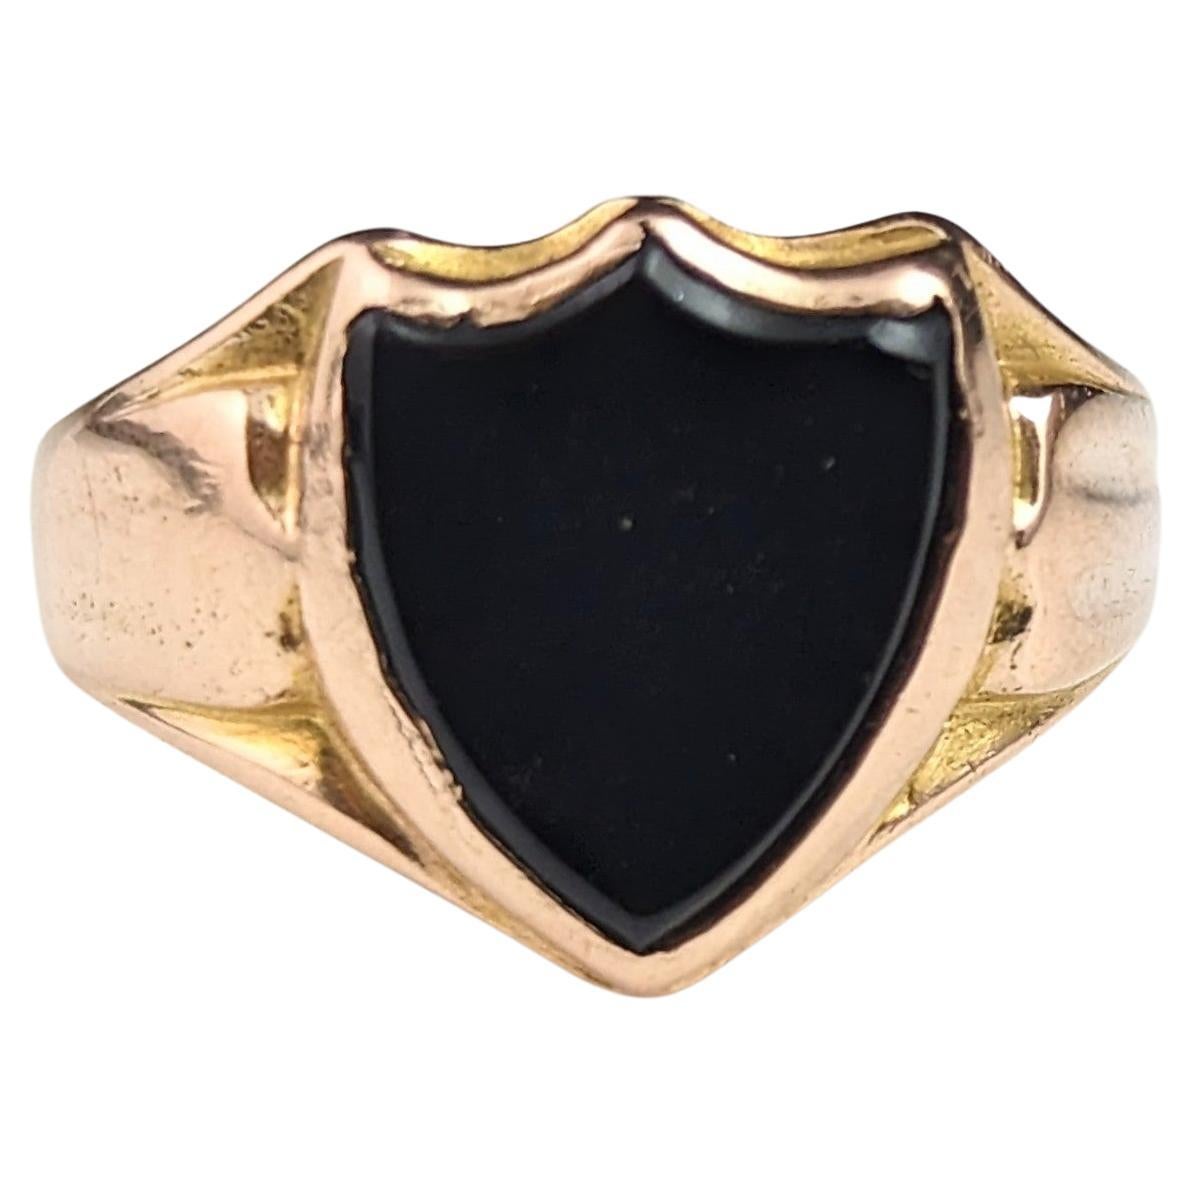 Antique 15k Gold Onyx Signet Ring, Shield Shaped, Pinky, Victorian